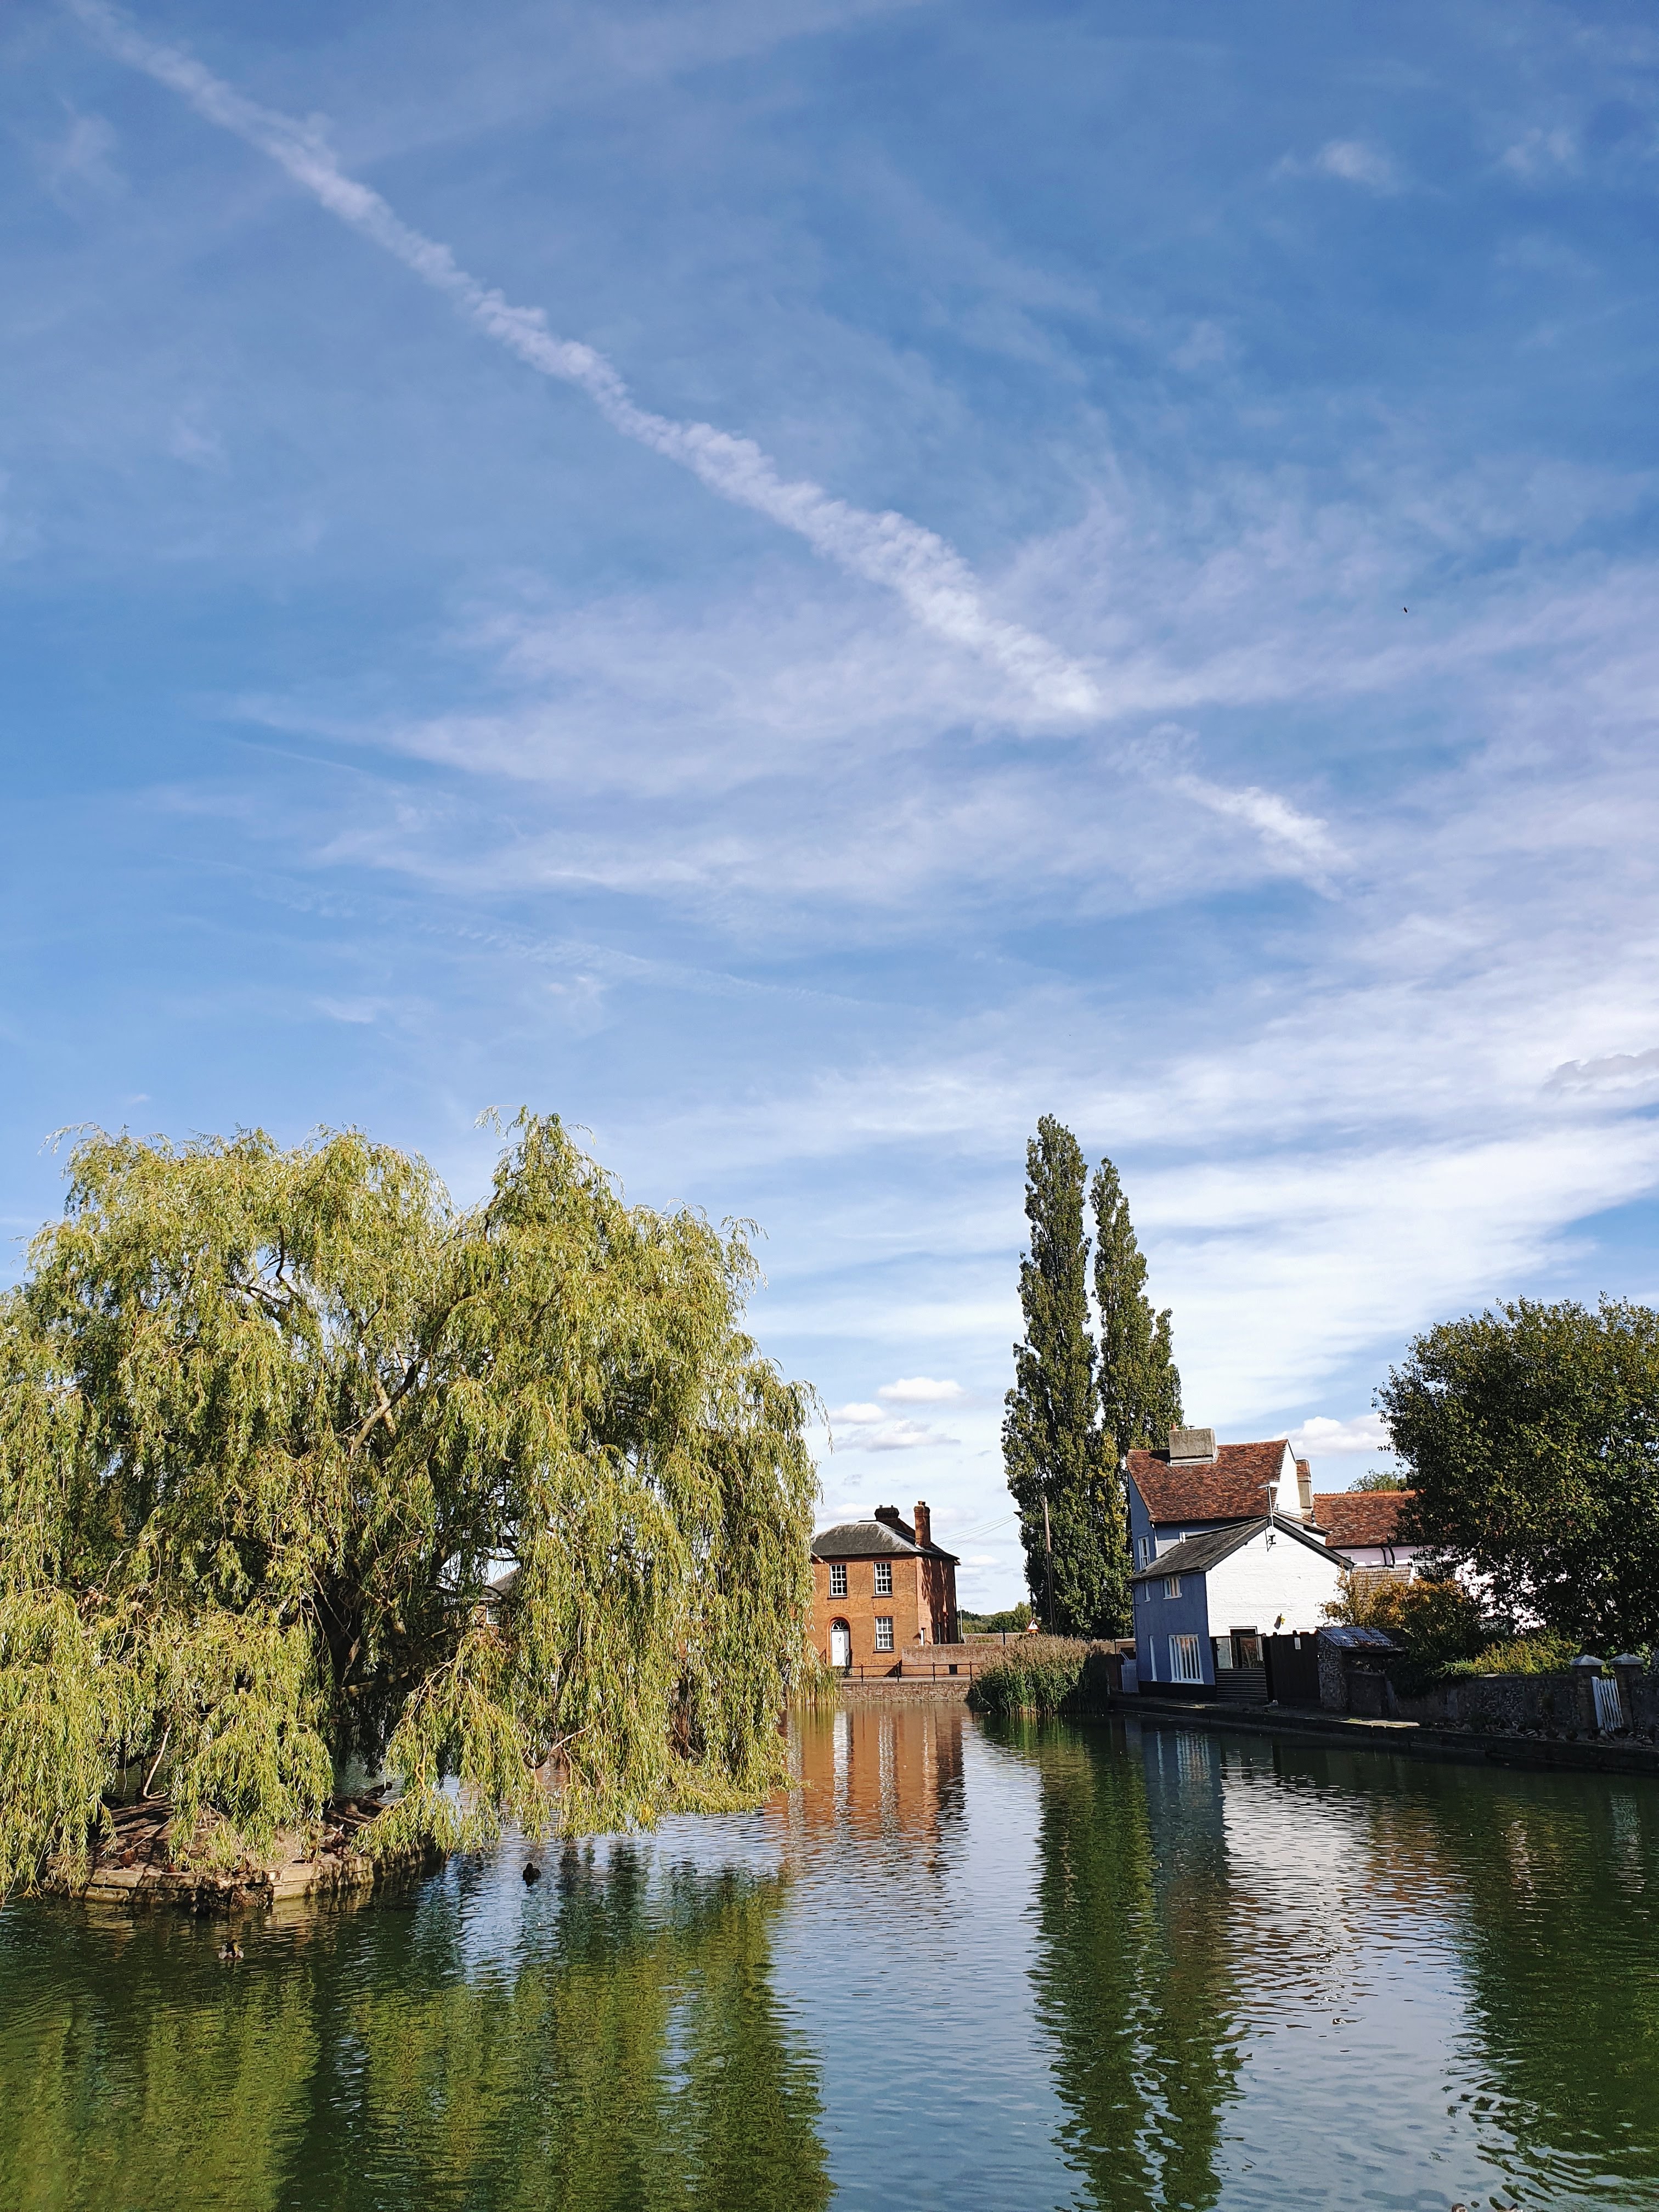 5 Picturesque Places to Wander in Essex